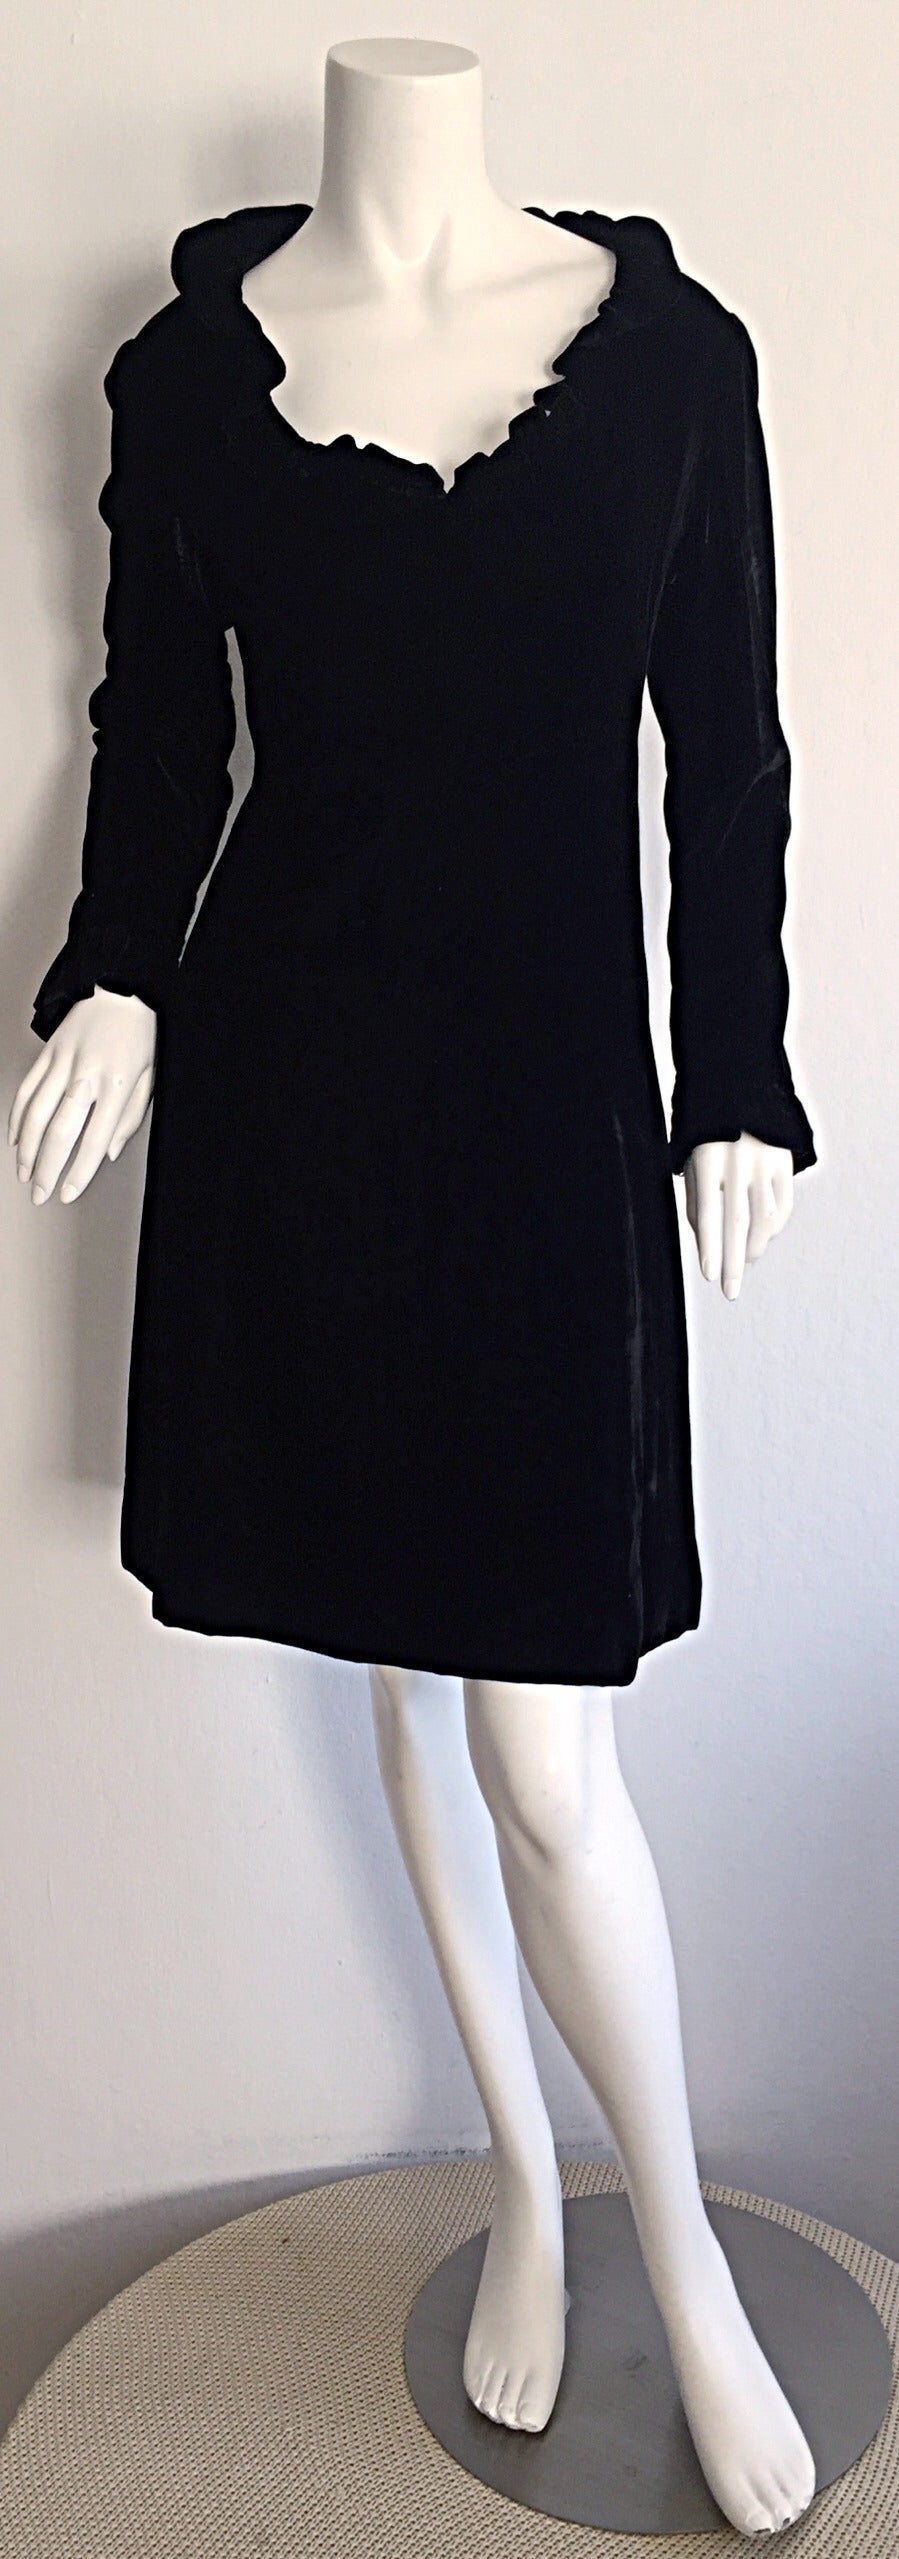 Stunning 1960s Mollie Parnis black silk velvet A-Line dress! Beautiful ruffle neckline, with matching ruffles at cuffs. The perfect little black dress, with an incredibly flattering fit. Jackie-O style. Fully lined in silk. In great condition.